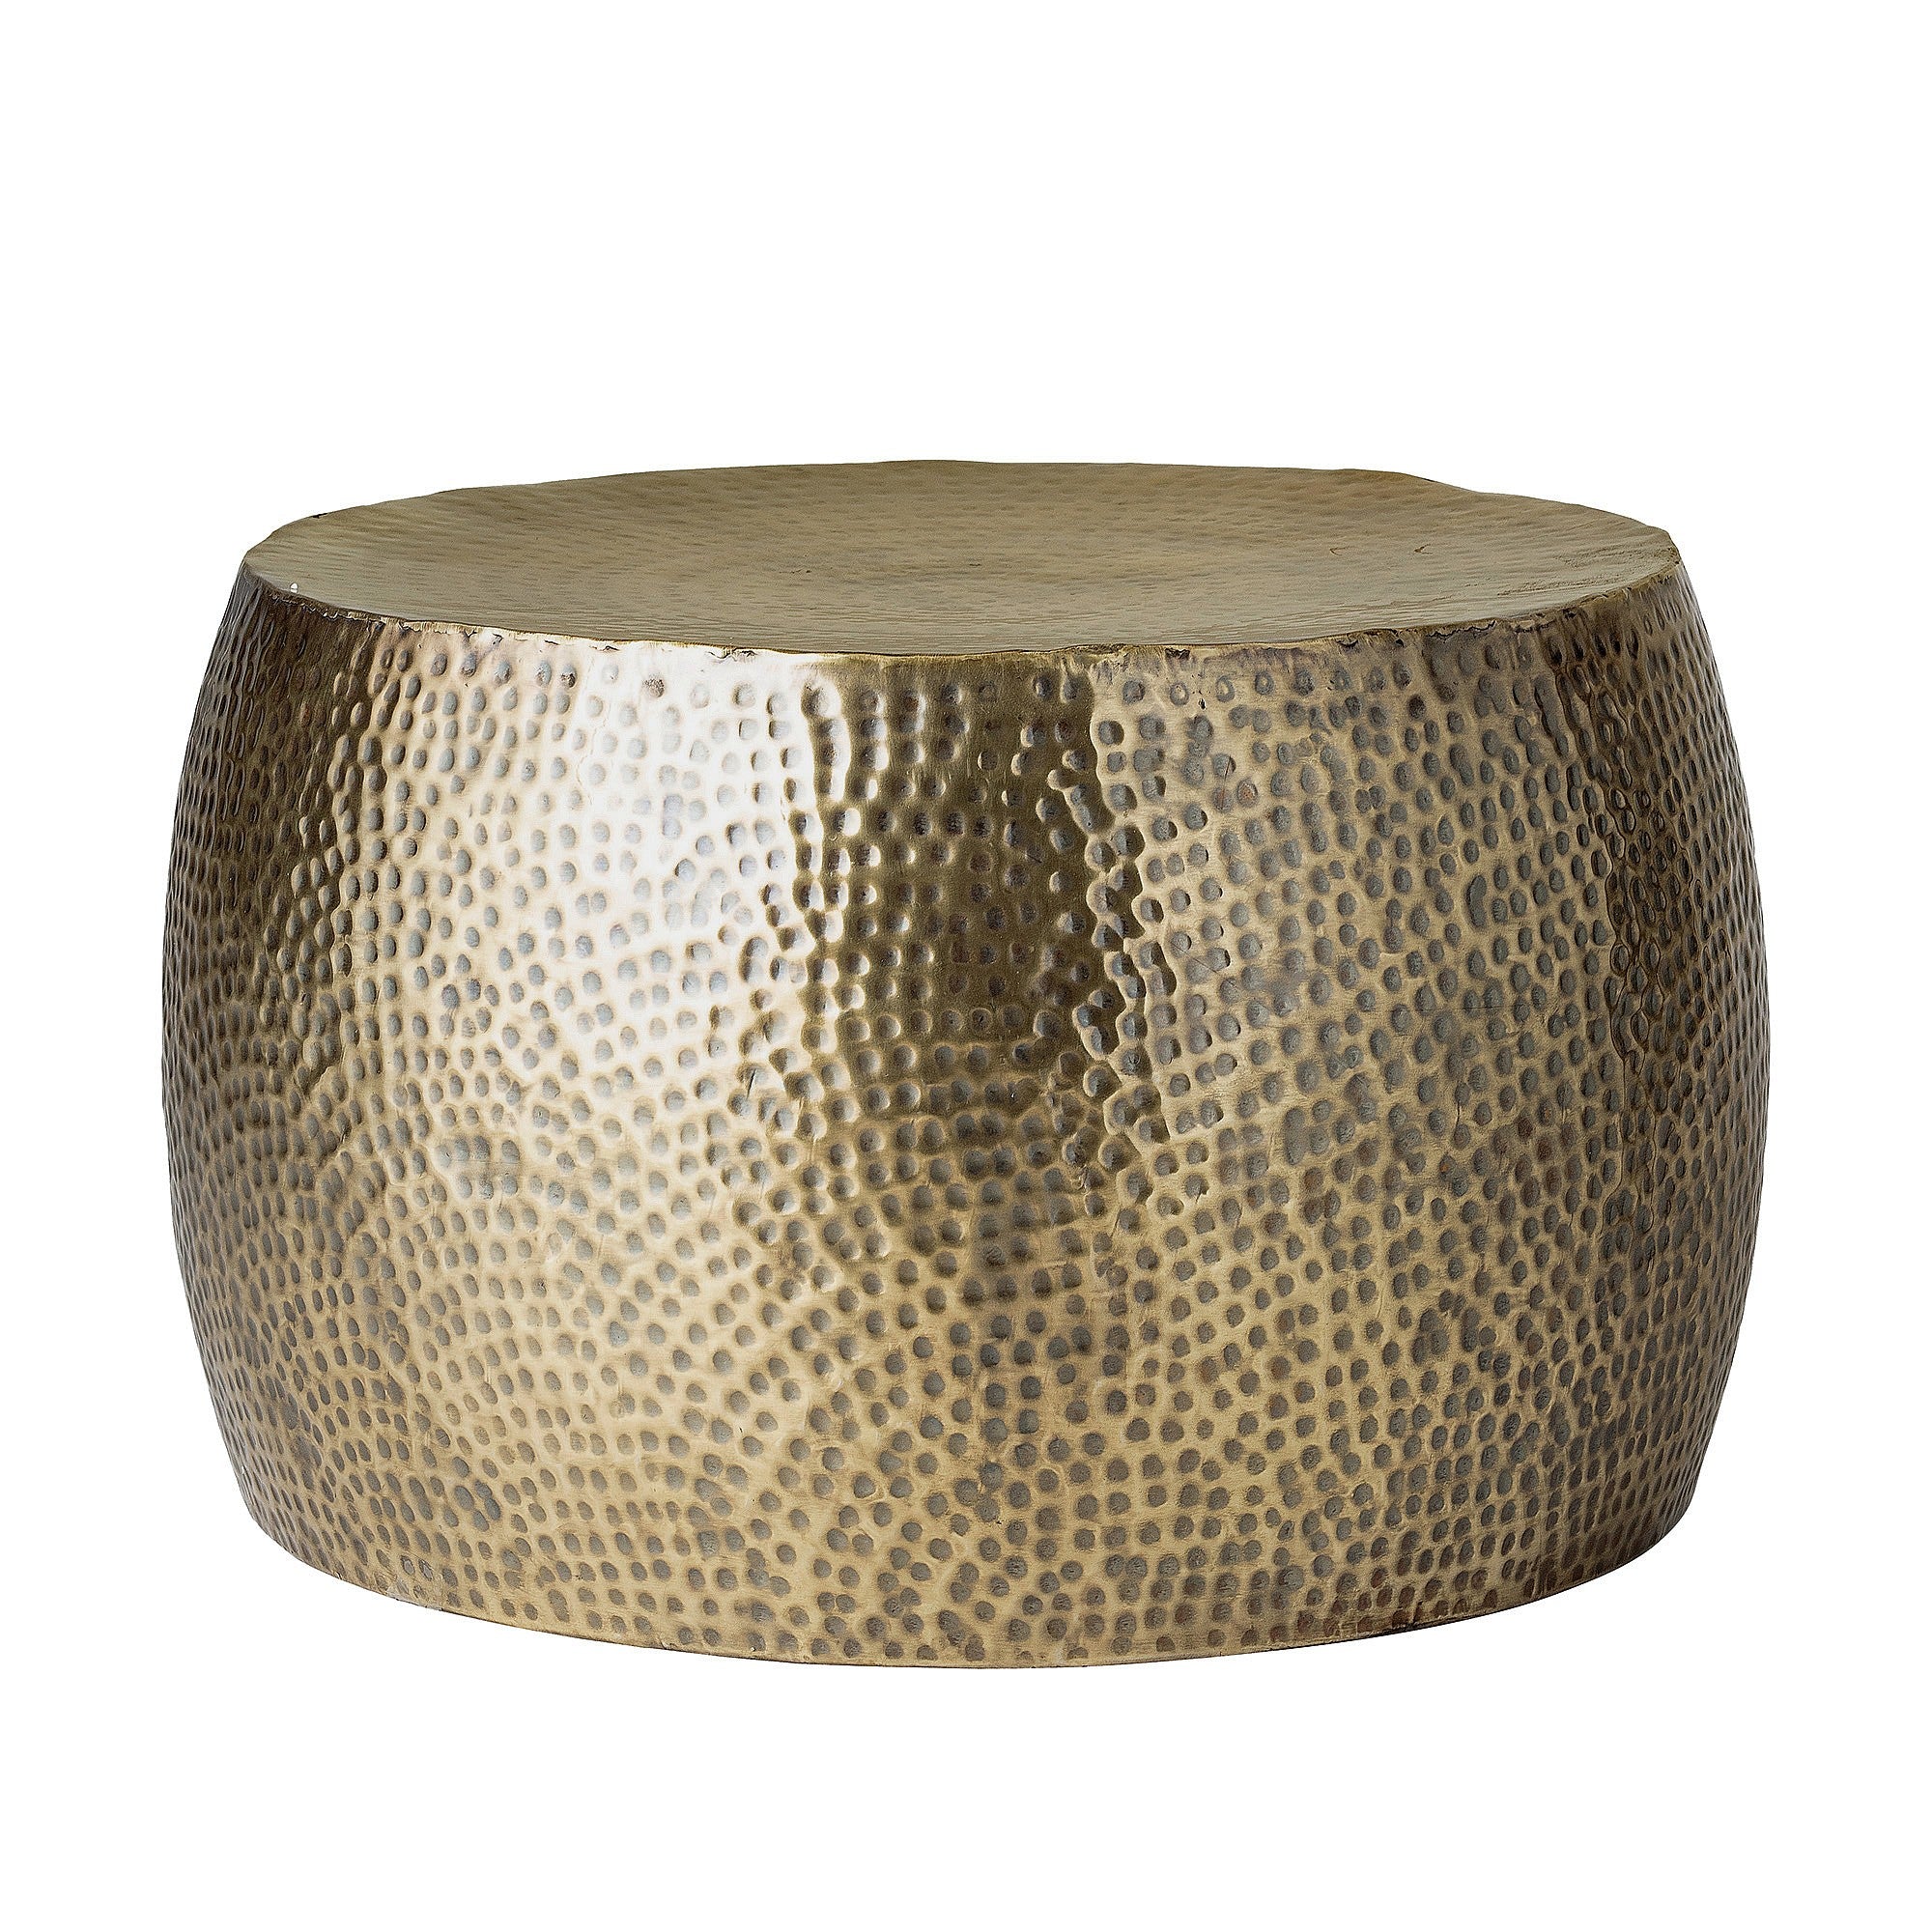 Hammered Brass Drum Coffee Table